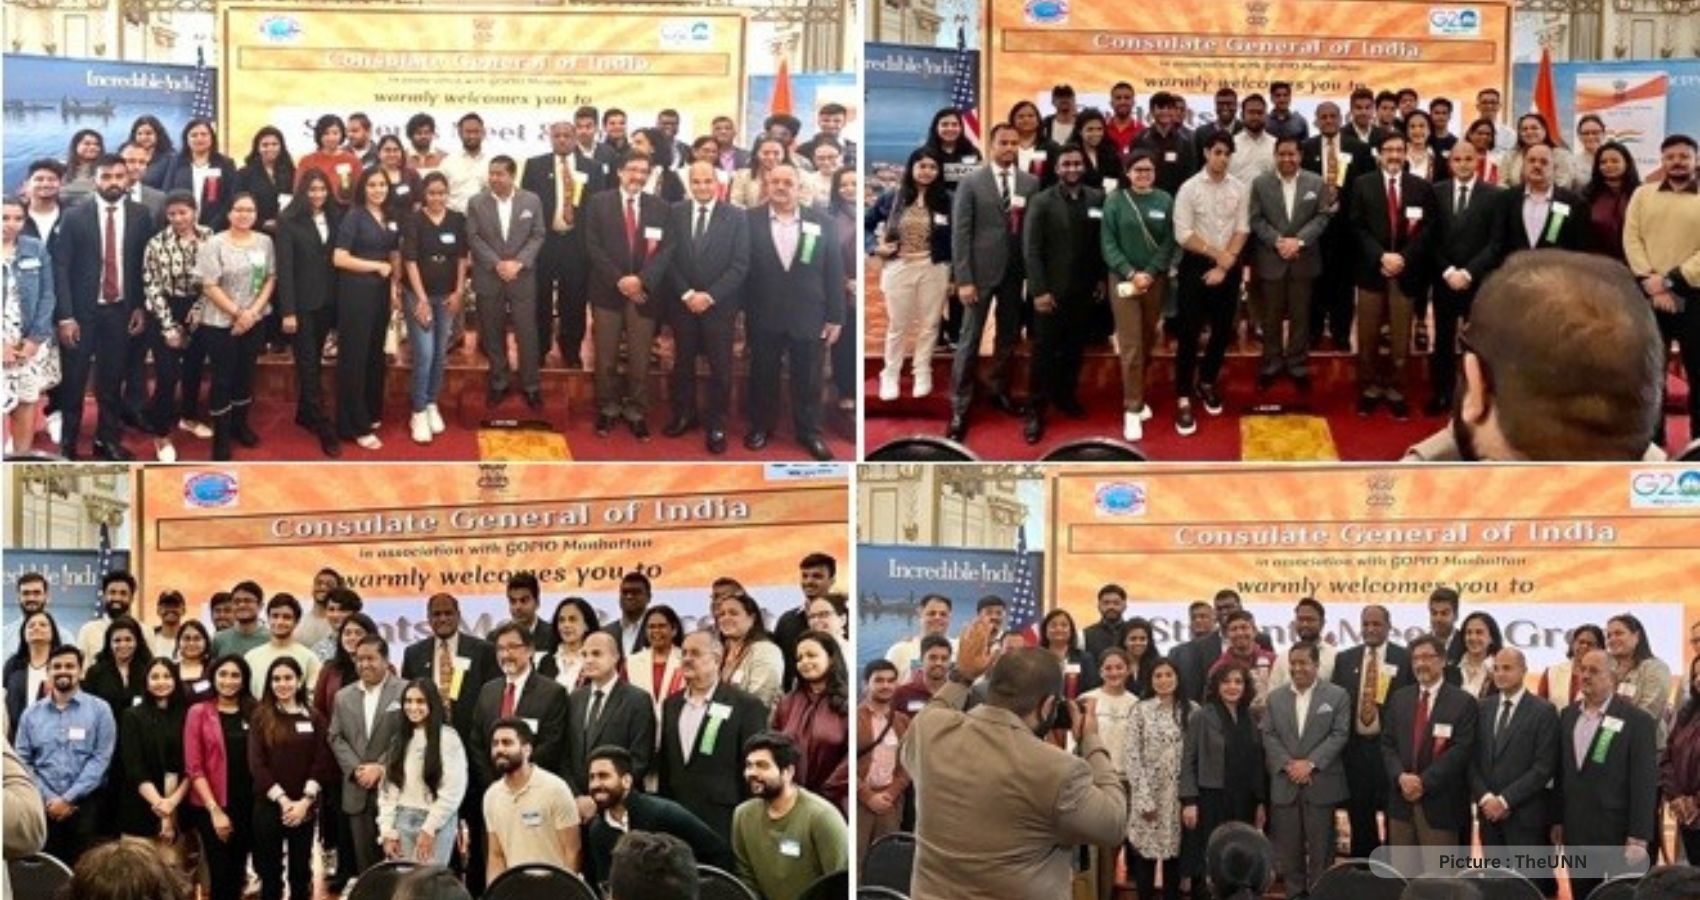 New York Indian Consulate and GOPIO Manhattan Organize ‘Meet Greet’ for Students from  India